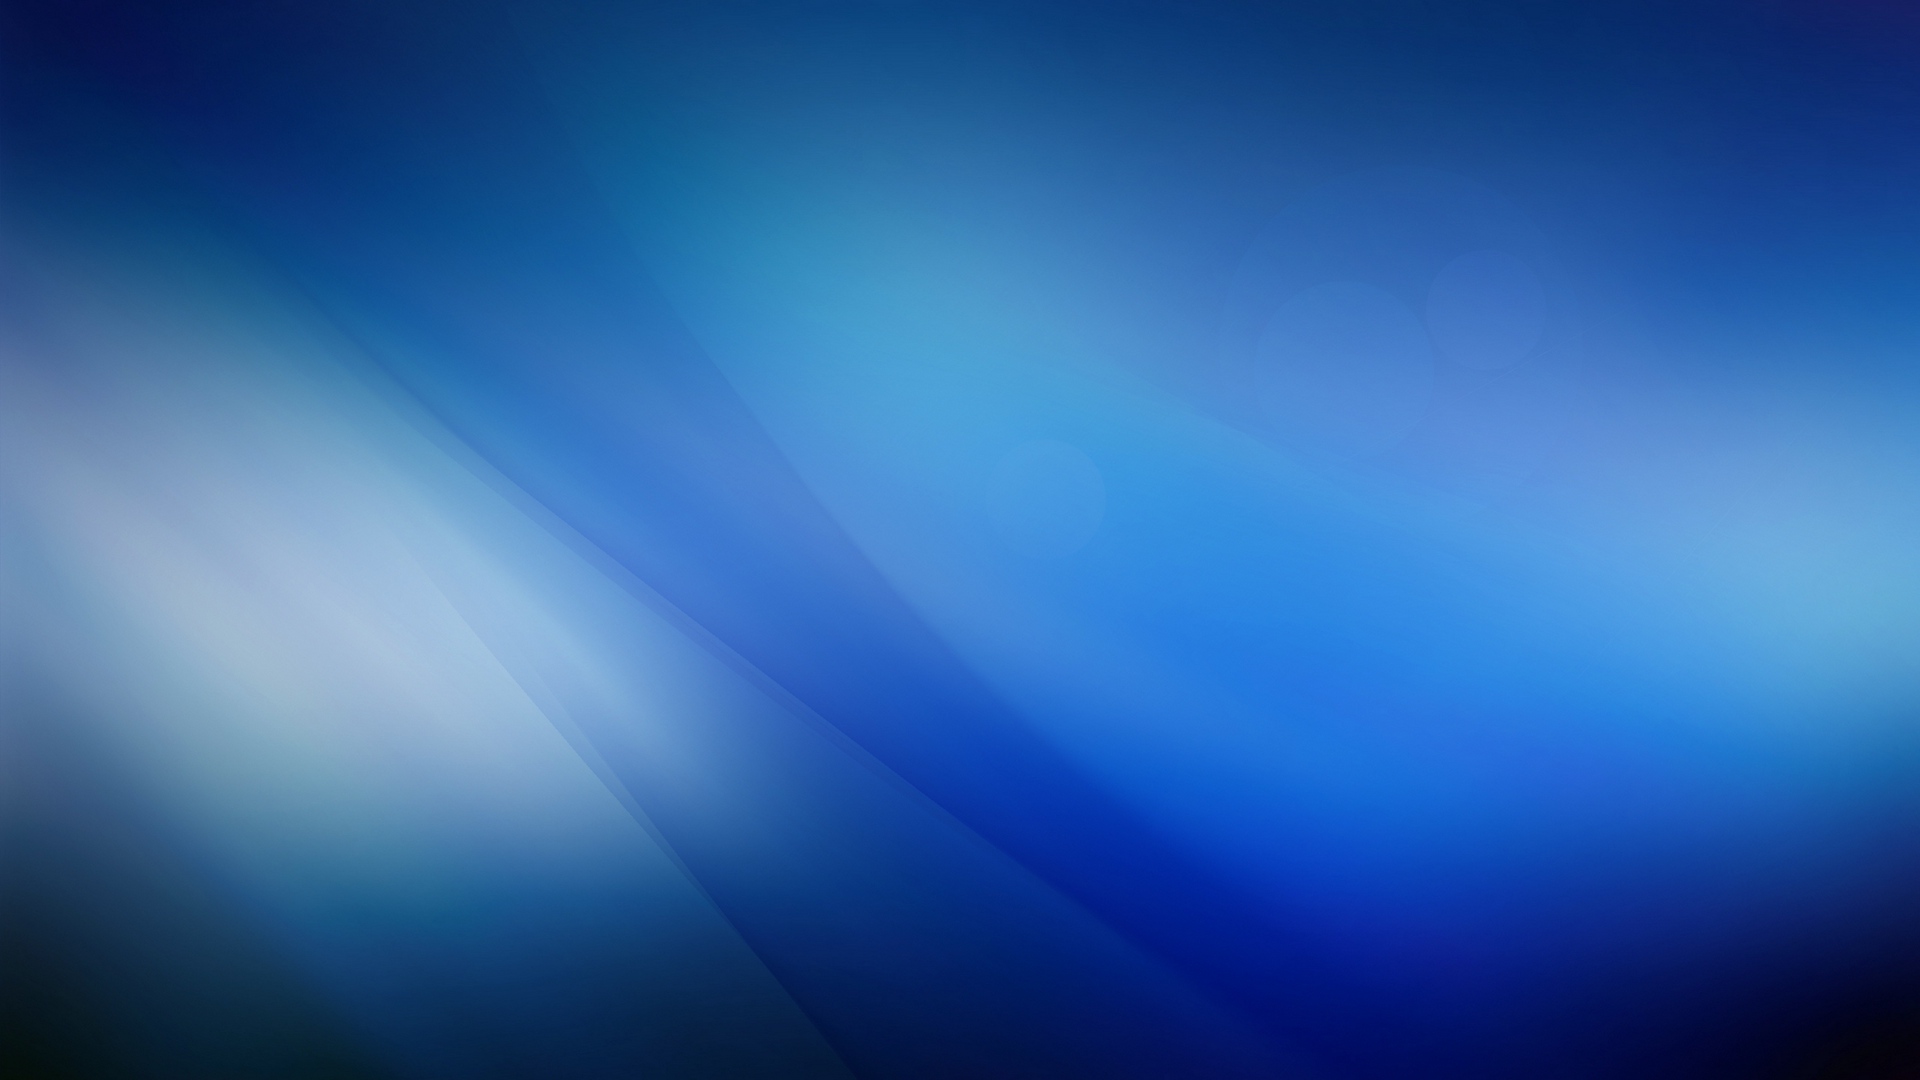 Wallpaper Blue Background, Wave, Abstract - Abstract Blue Background - HD Wallpaper 